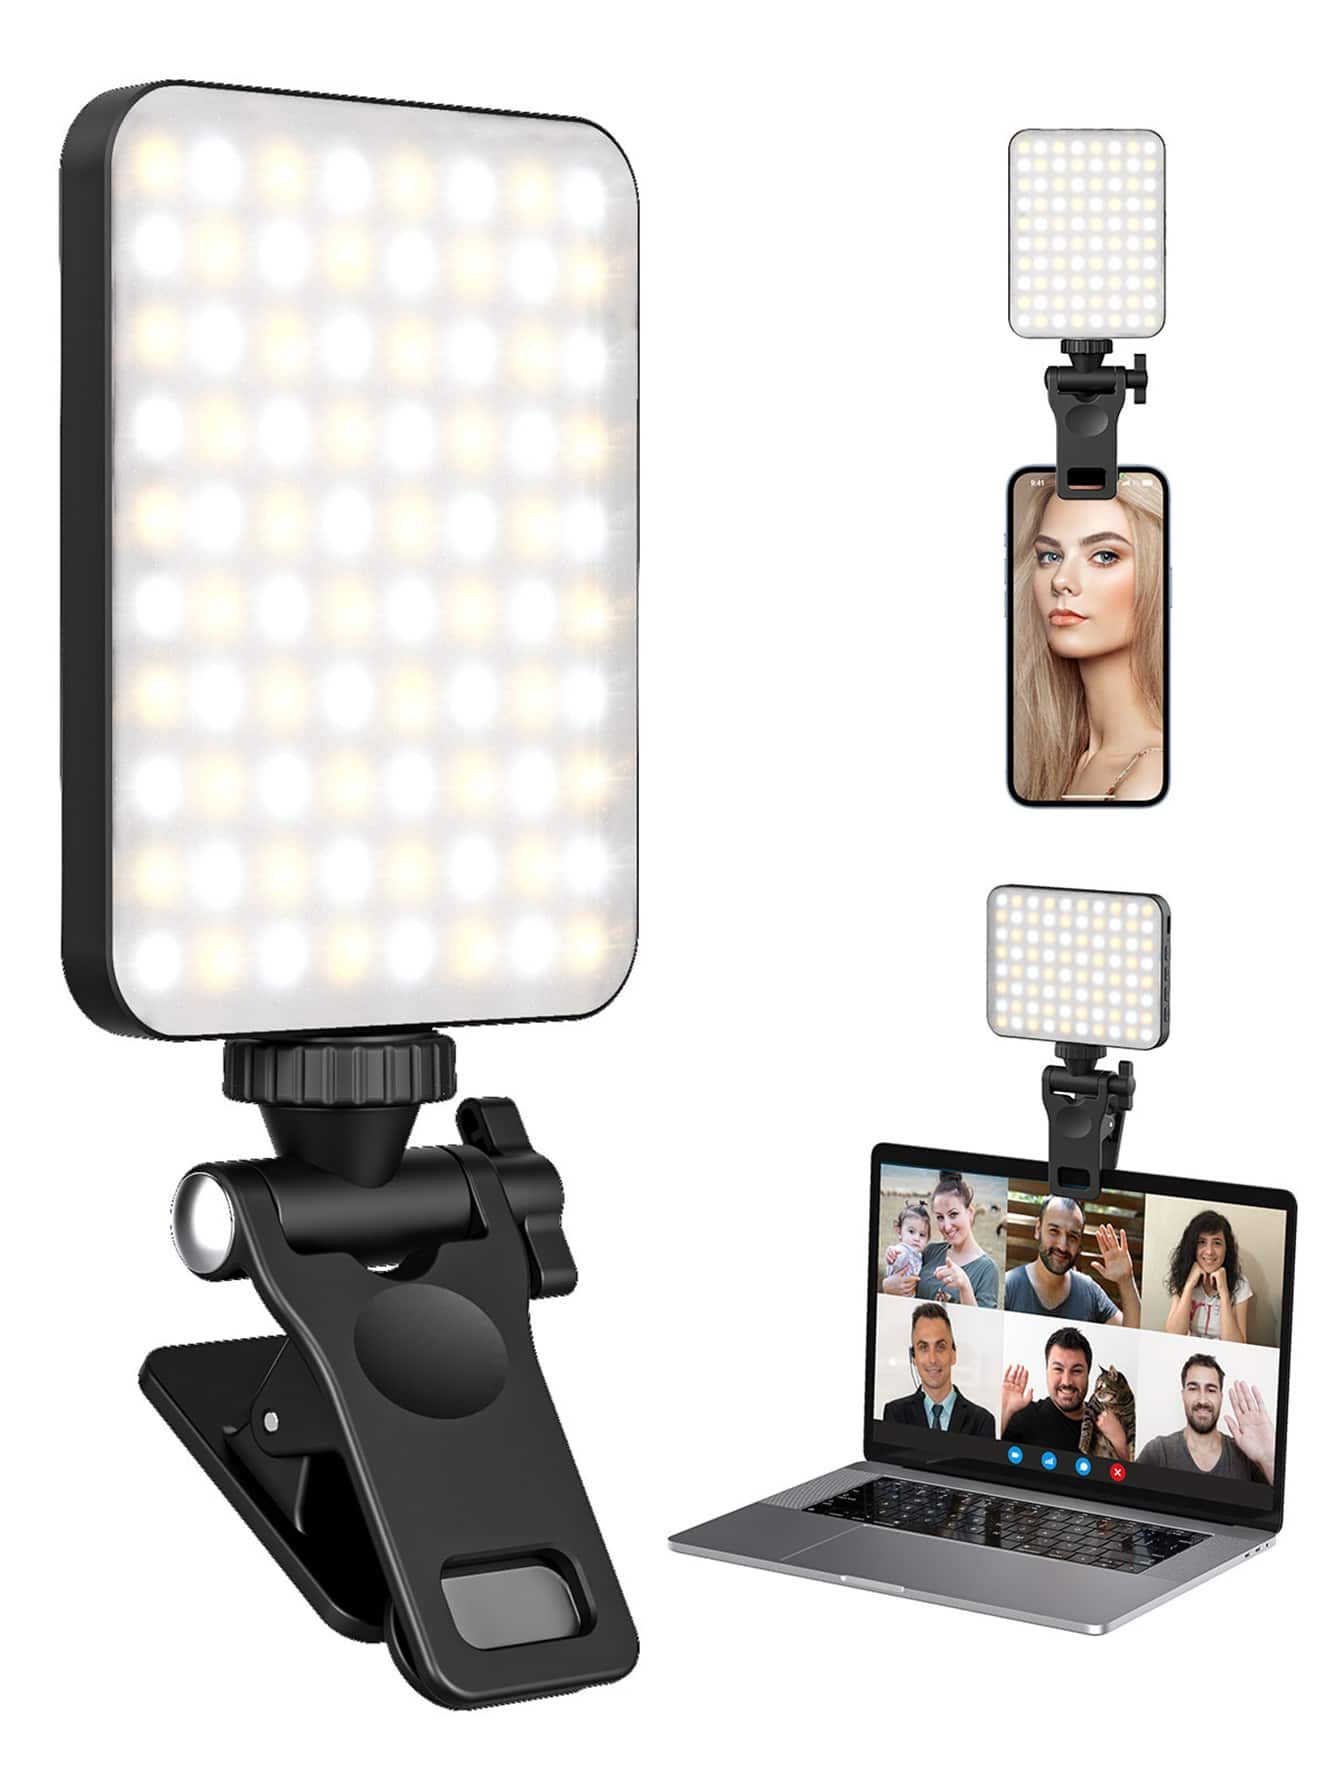 10-inch Selfie Ring Light With Phone Holder For Live Streaming100+ sold recentlyGBP£12.50 | SHEIN